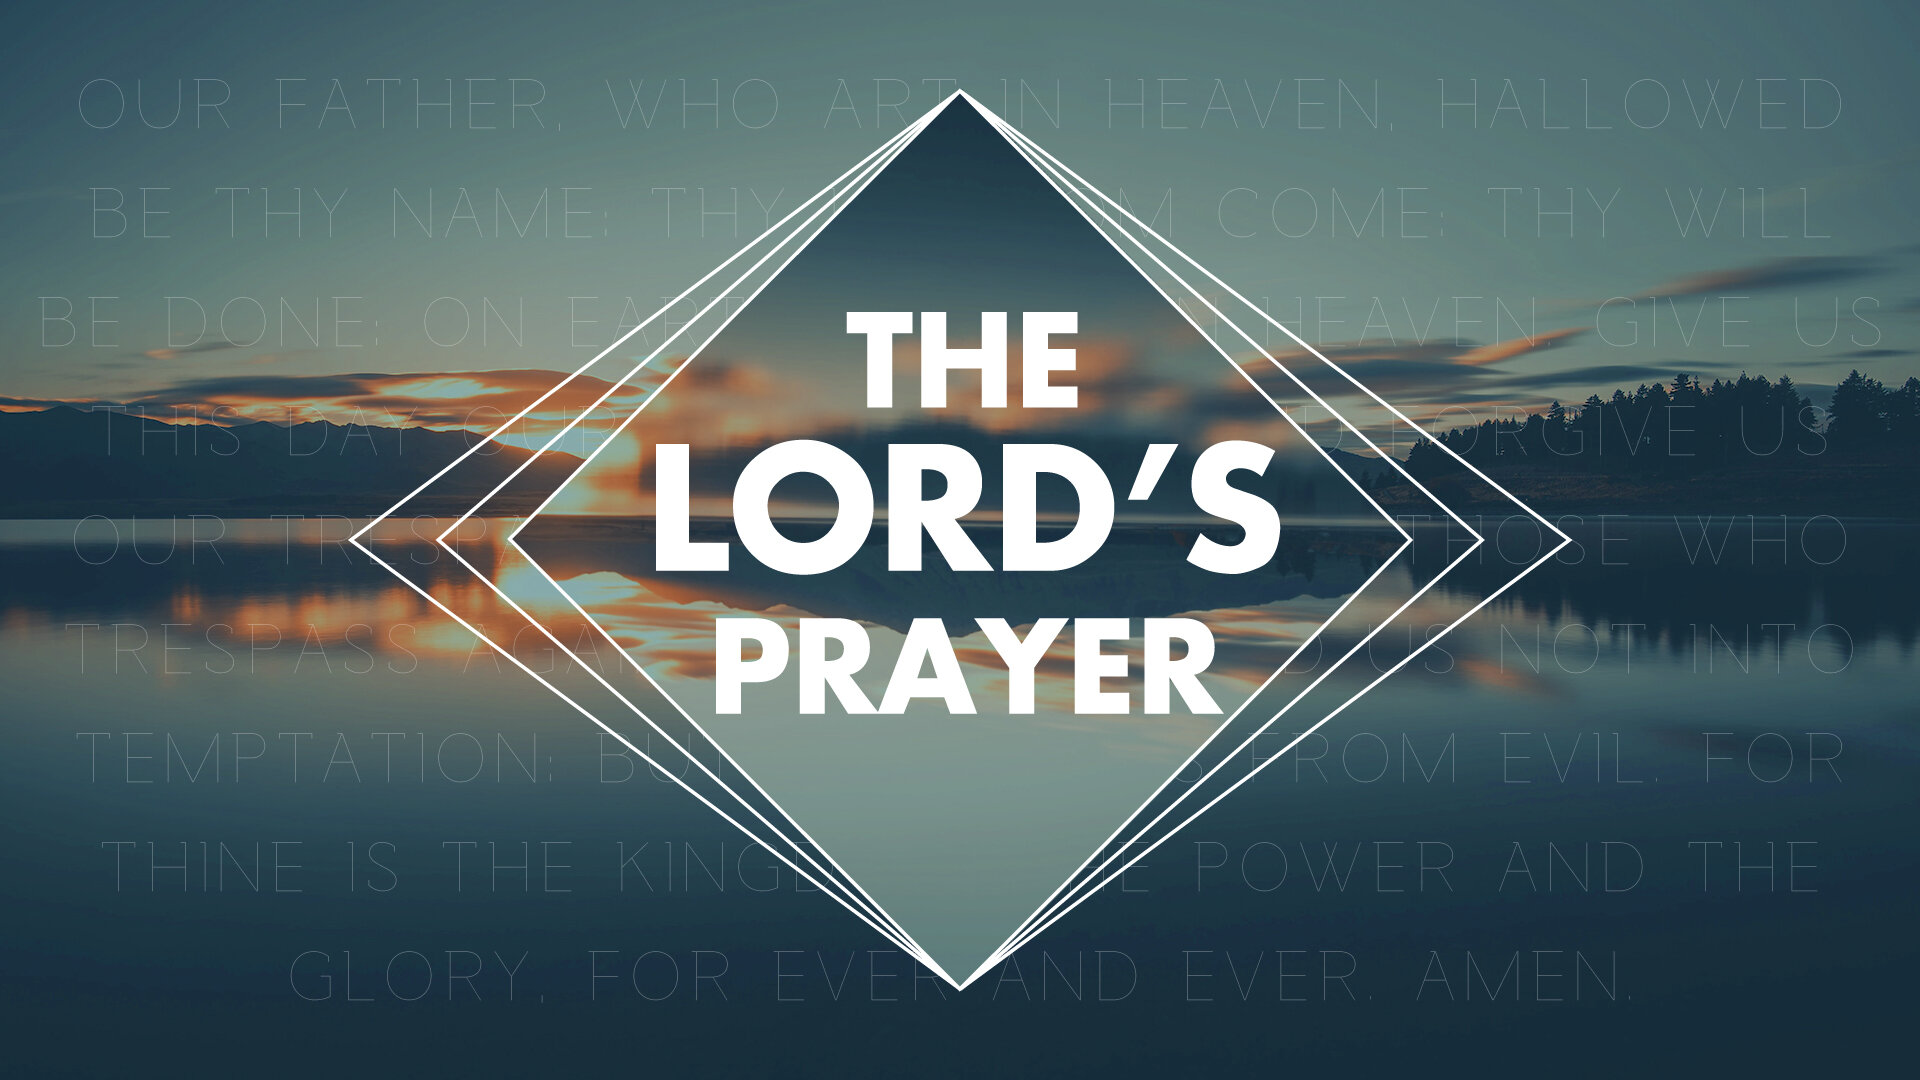 Message Series: The Lord's Prayer